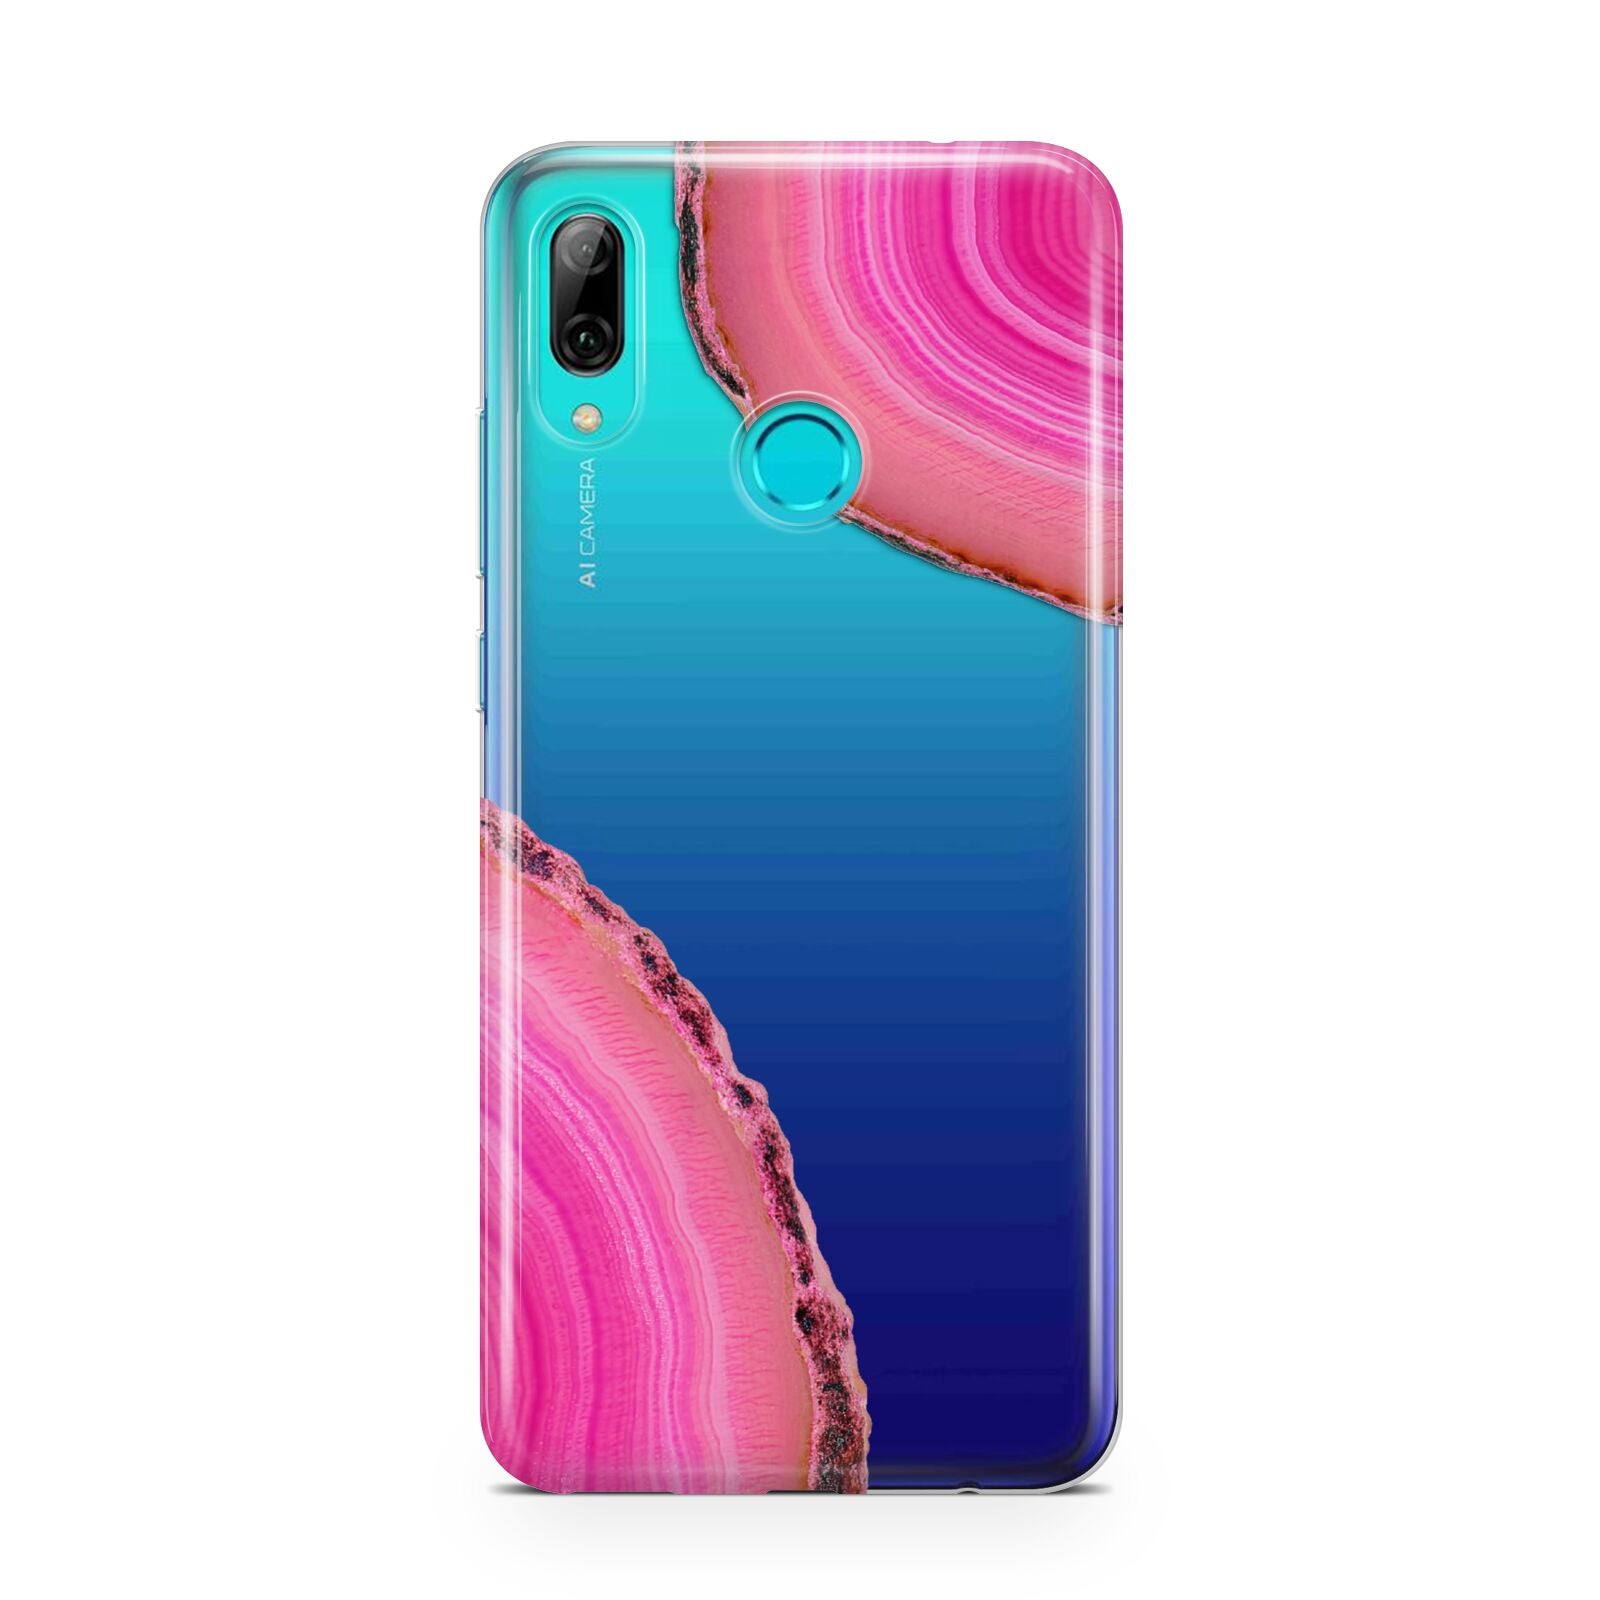 Agate Bright Pink Huawei P Smart 2019 Case